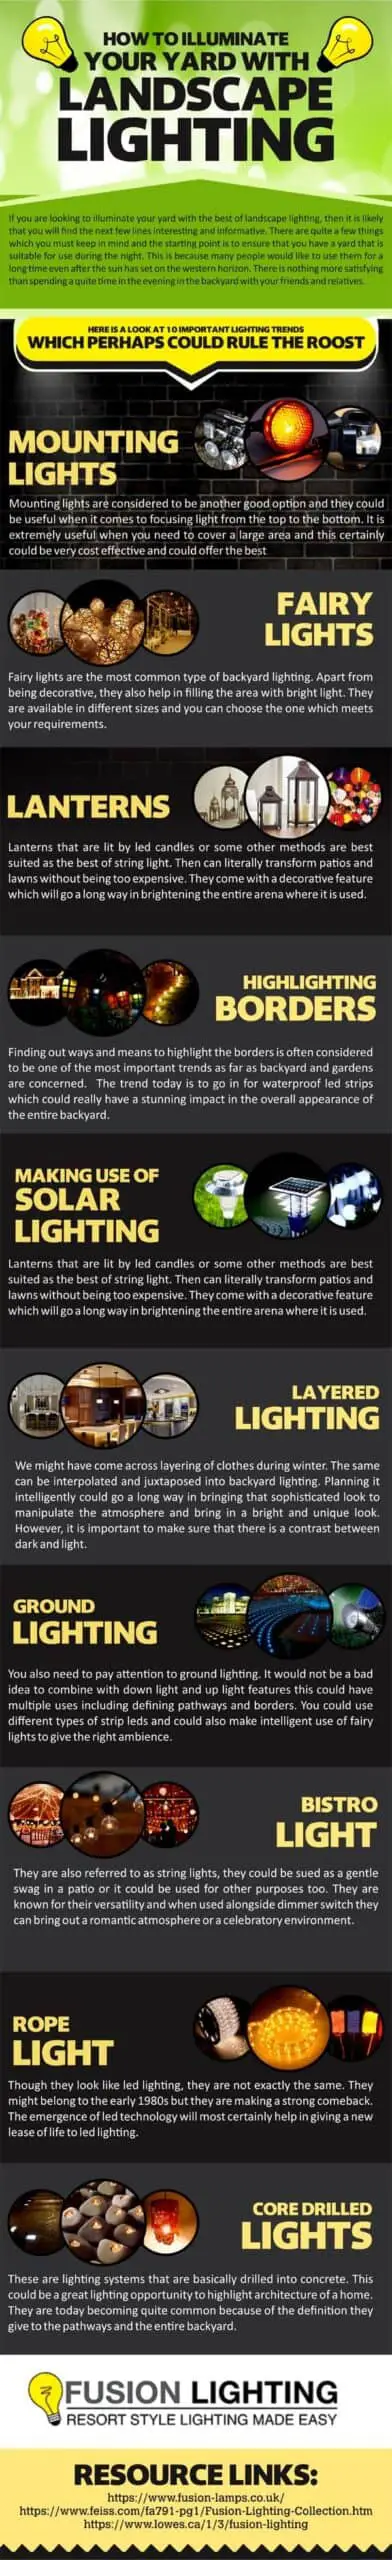 How To Illuminate Your Yard With Landscape Lighting 6 - Outdoor Lighting